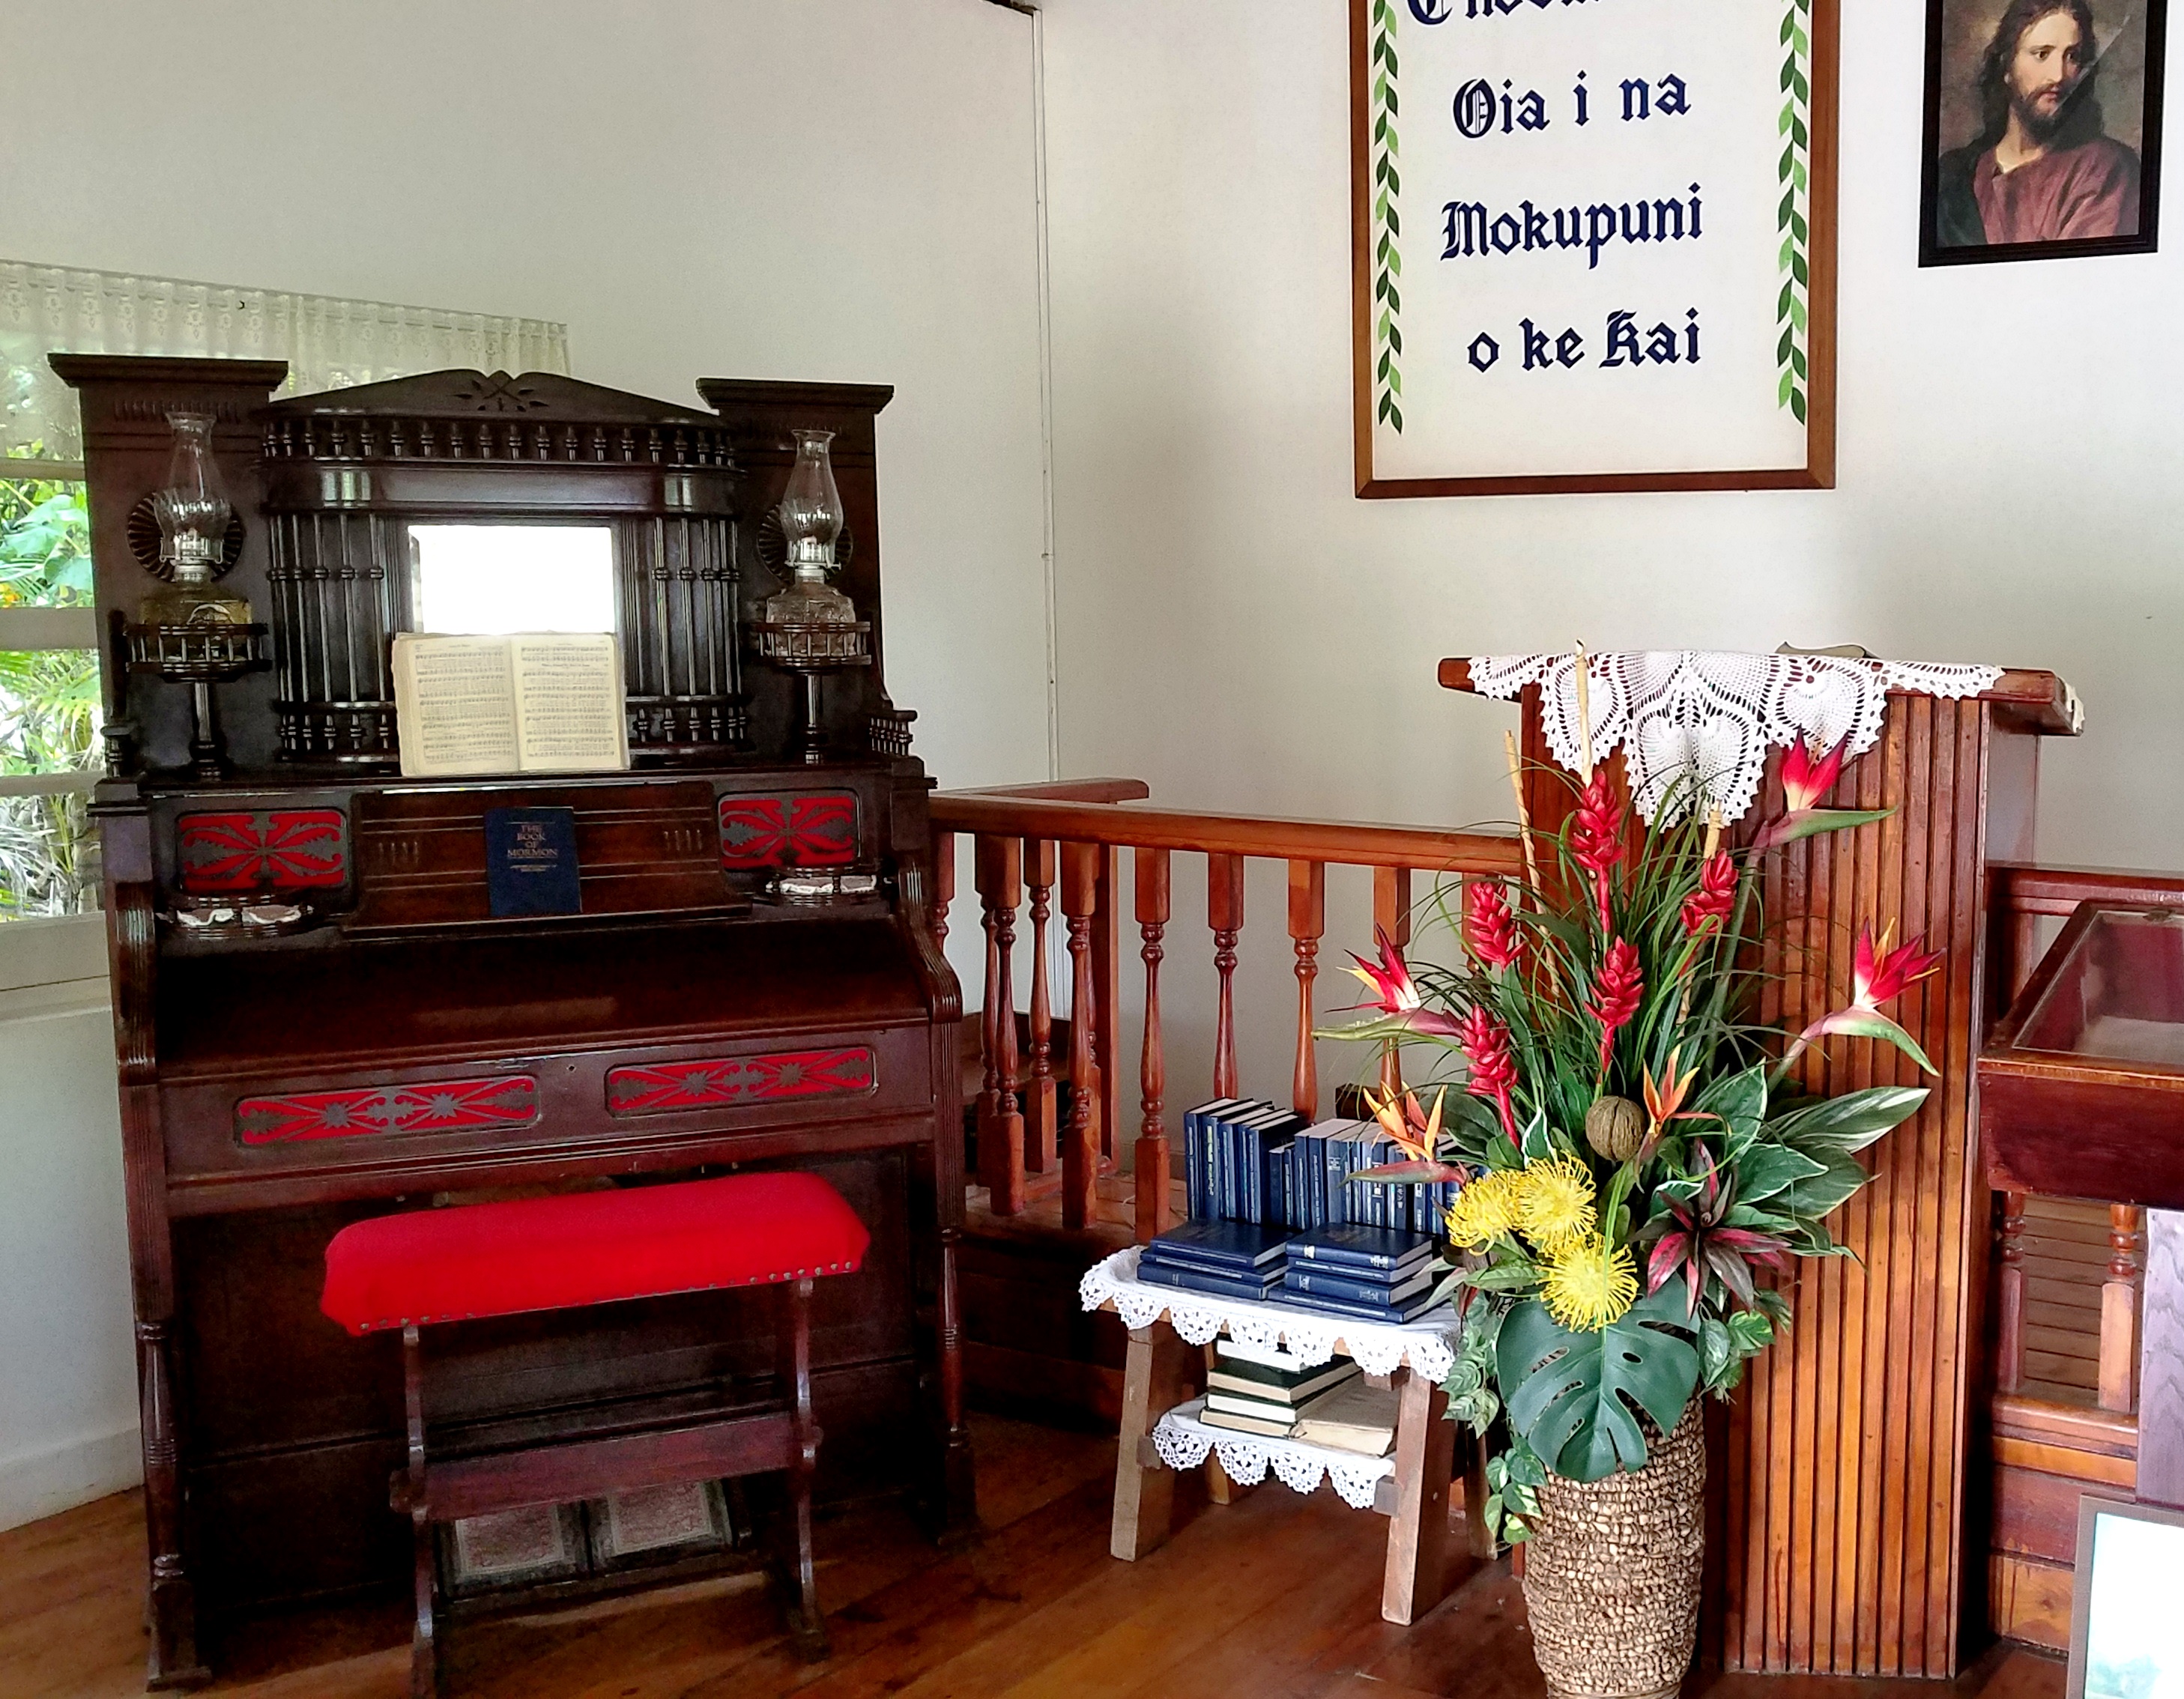 Interior photo of Mission Home at the Polynesian Cultural Center including the Etwey Organ and pulpit